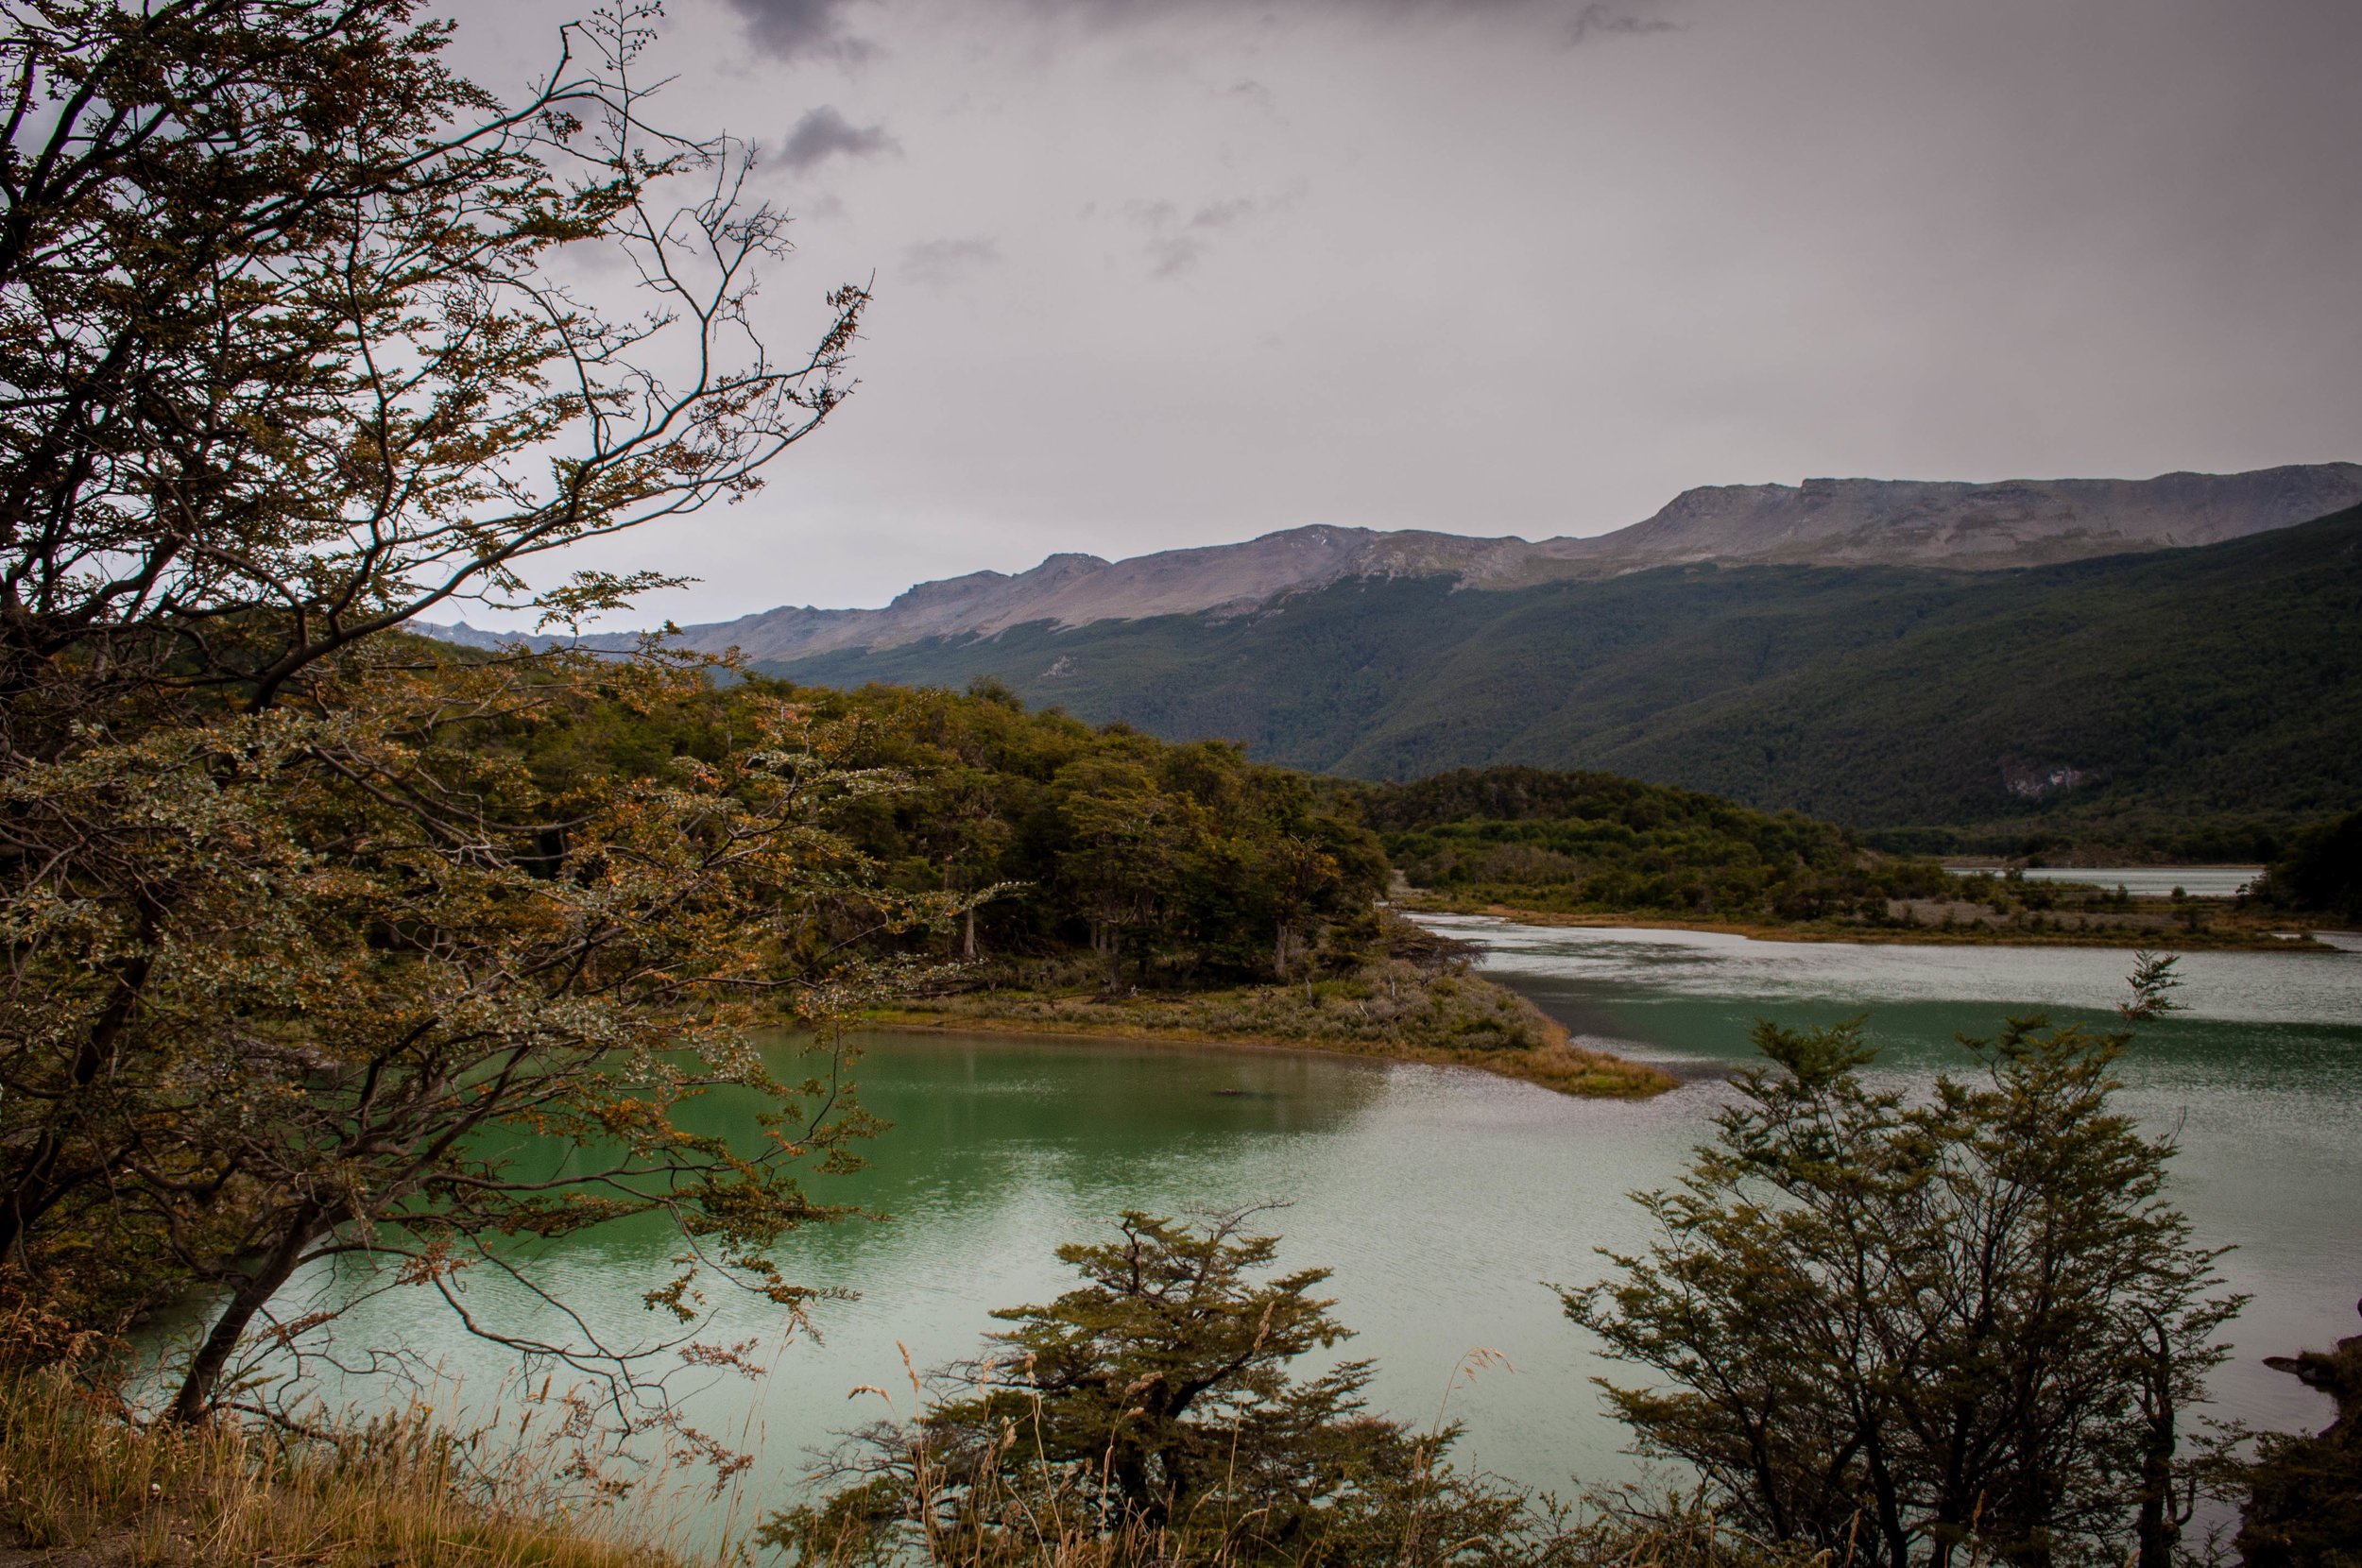 Views from the Parque Nacional Tierra del Fuego. Best things to do in Ushuaia